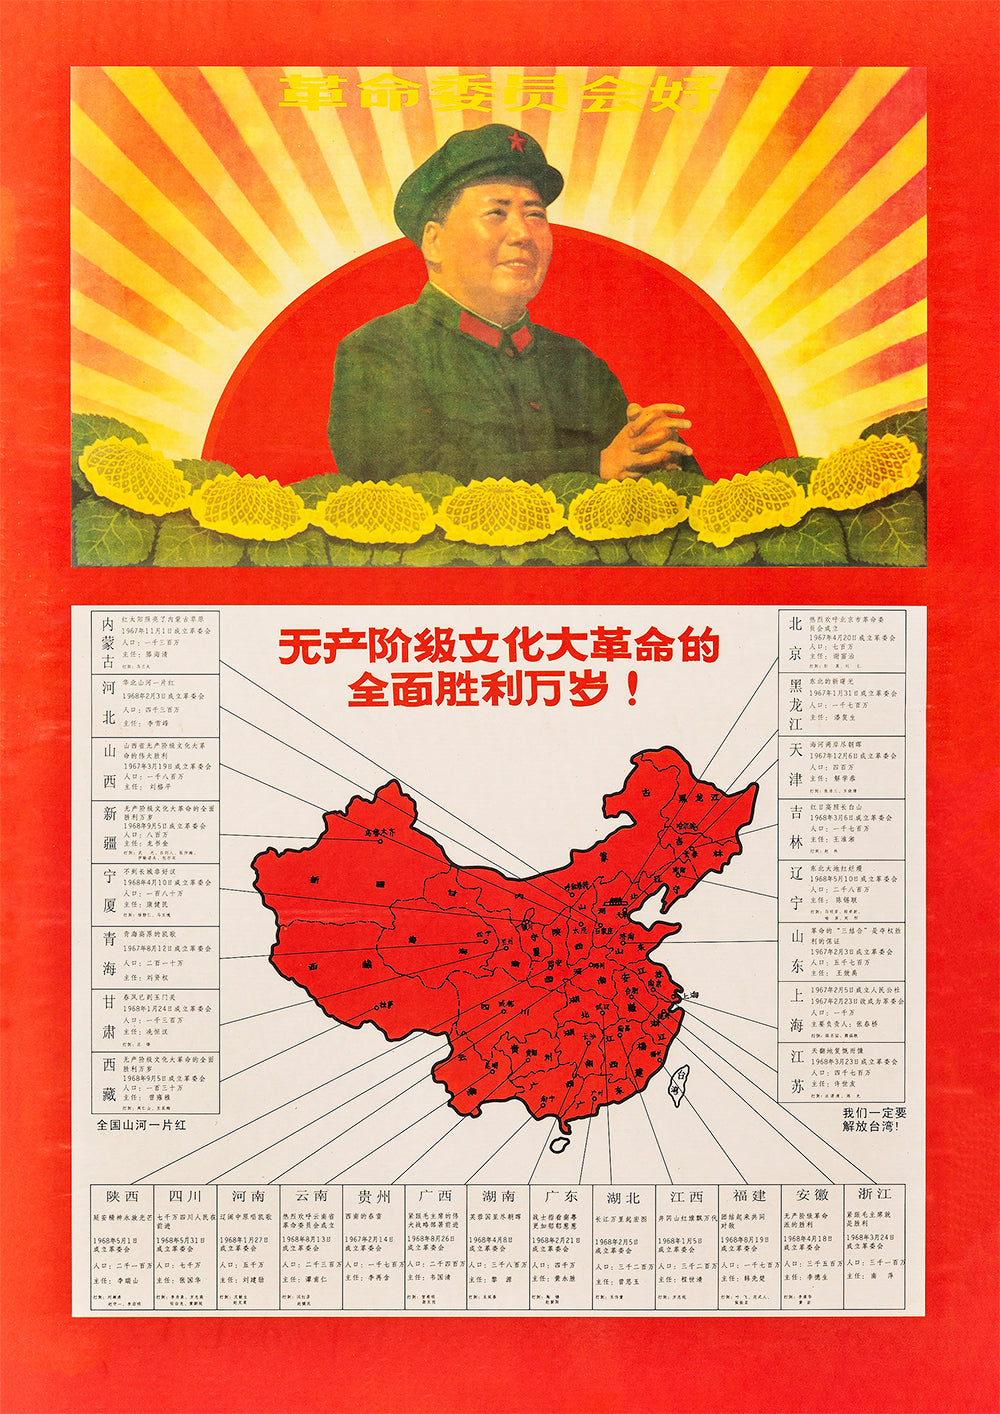 Glory to the great proletarian Cultural Revolution! – Chinese poster